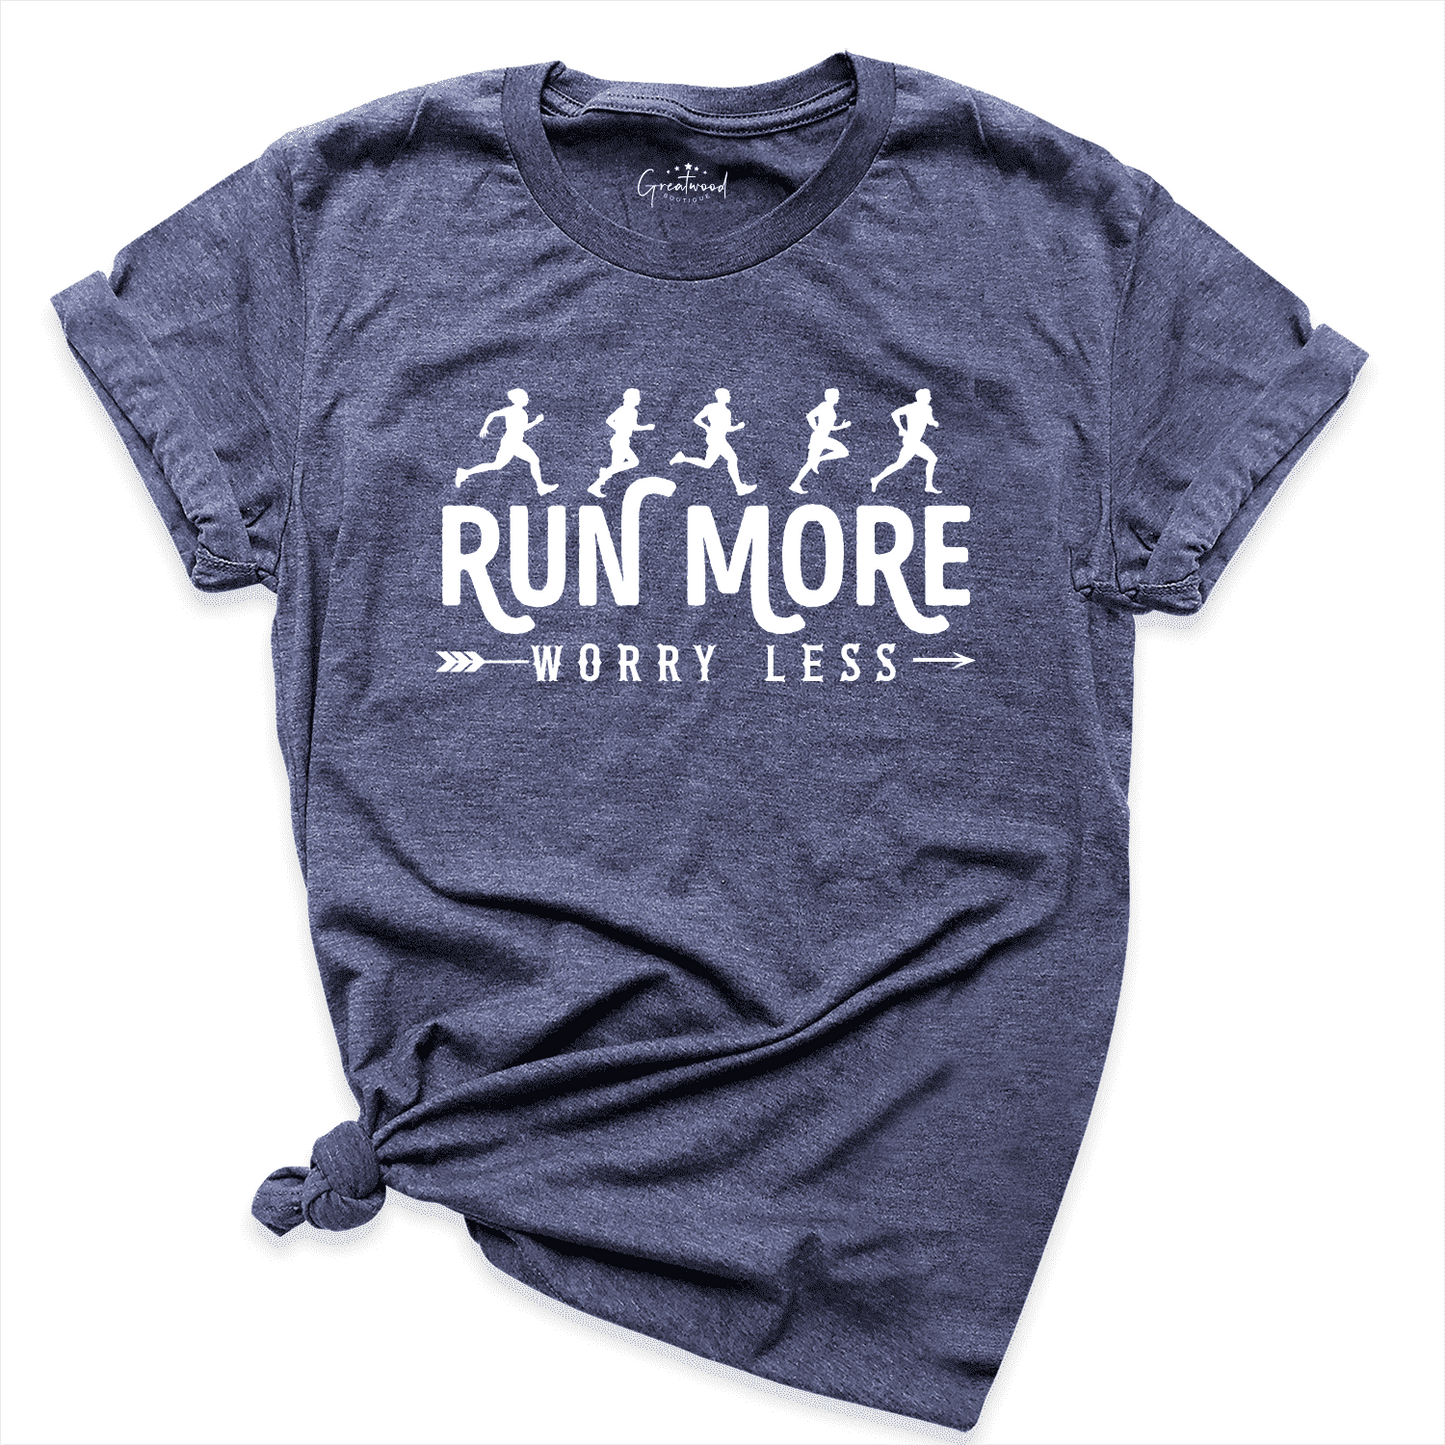 Run More Sport Shirt Navy - Greatwood Boutique